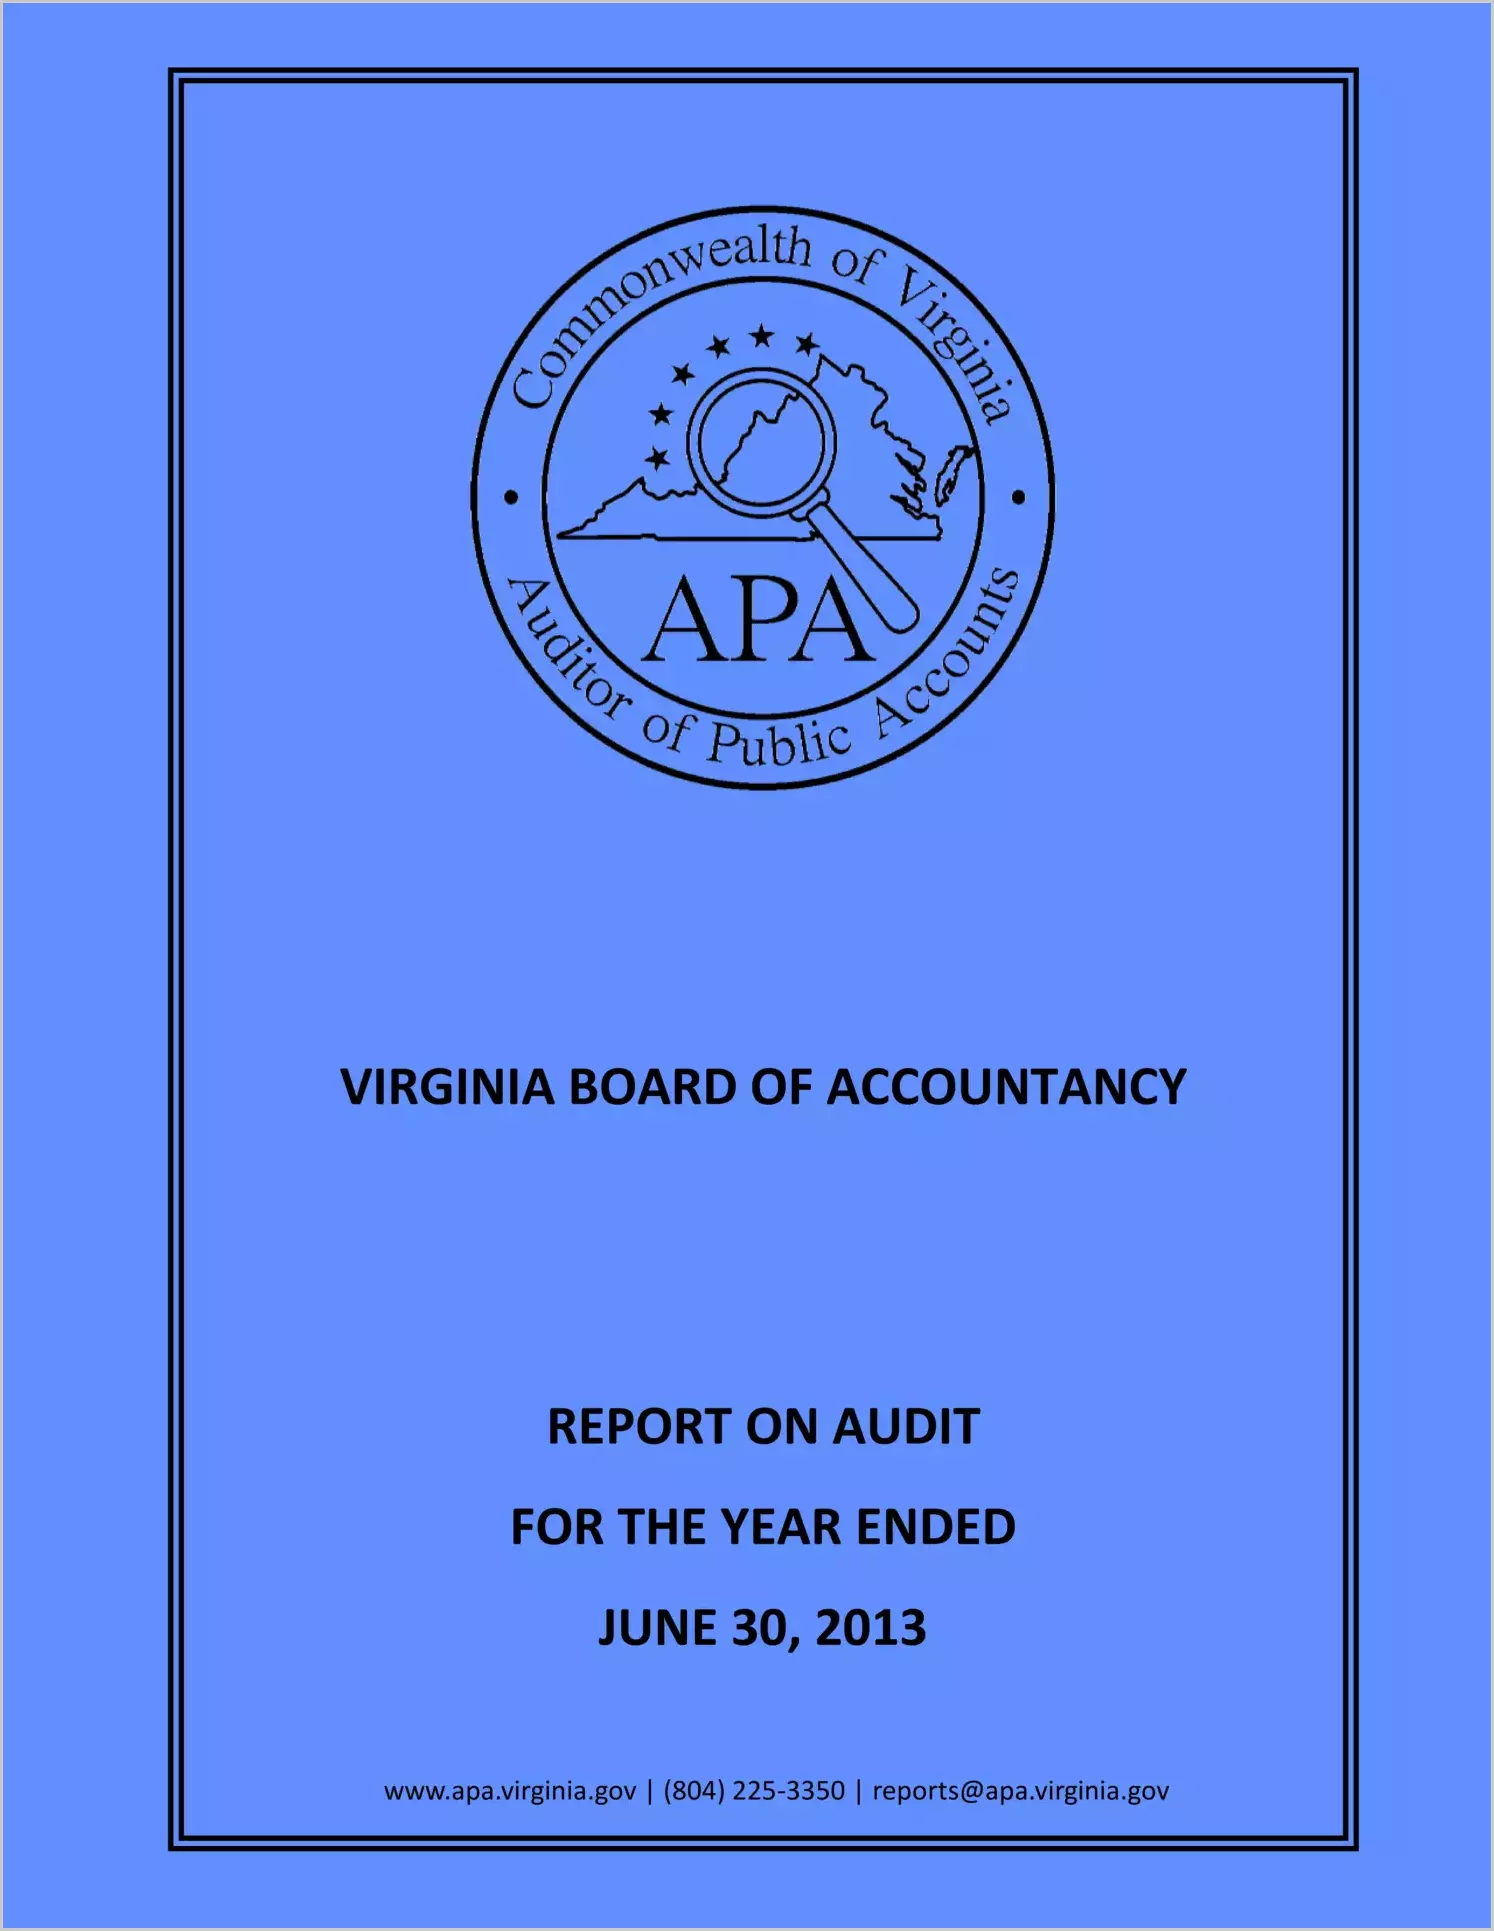 Virginia Board of Accountancy for the year ended June 30, 2013